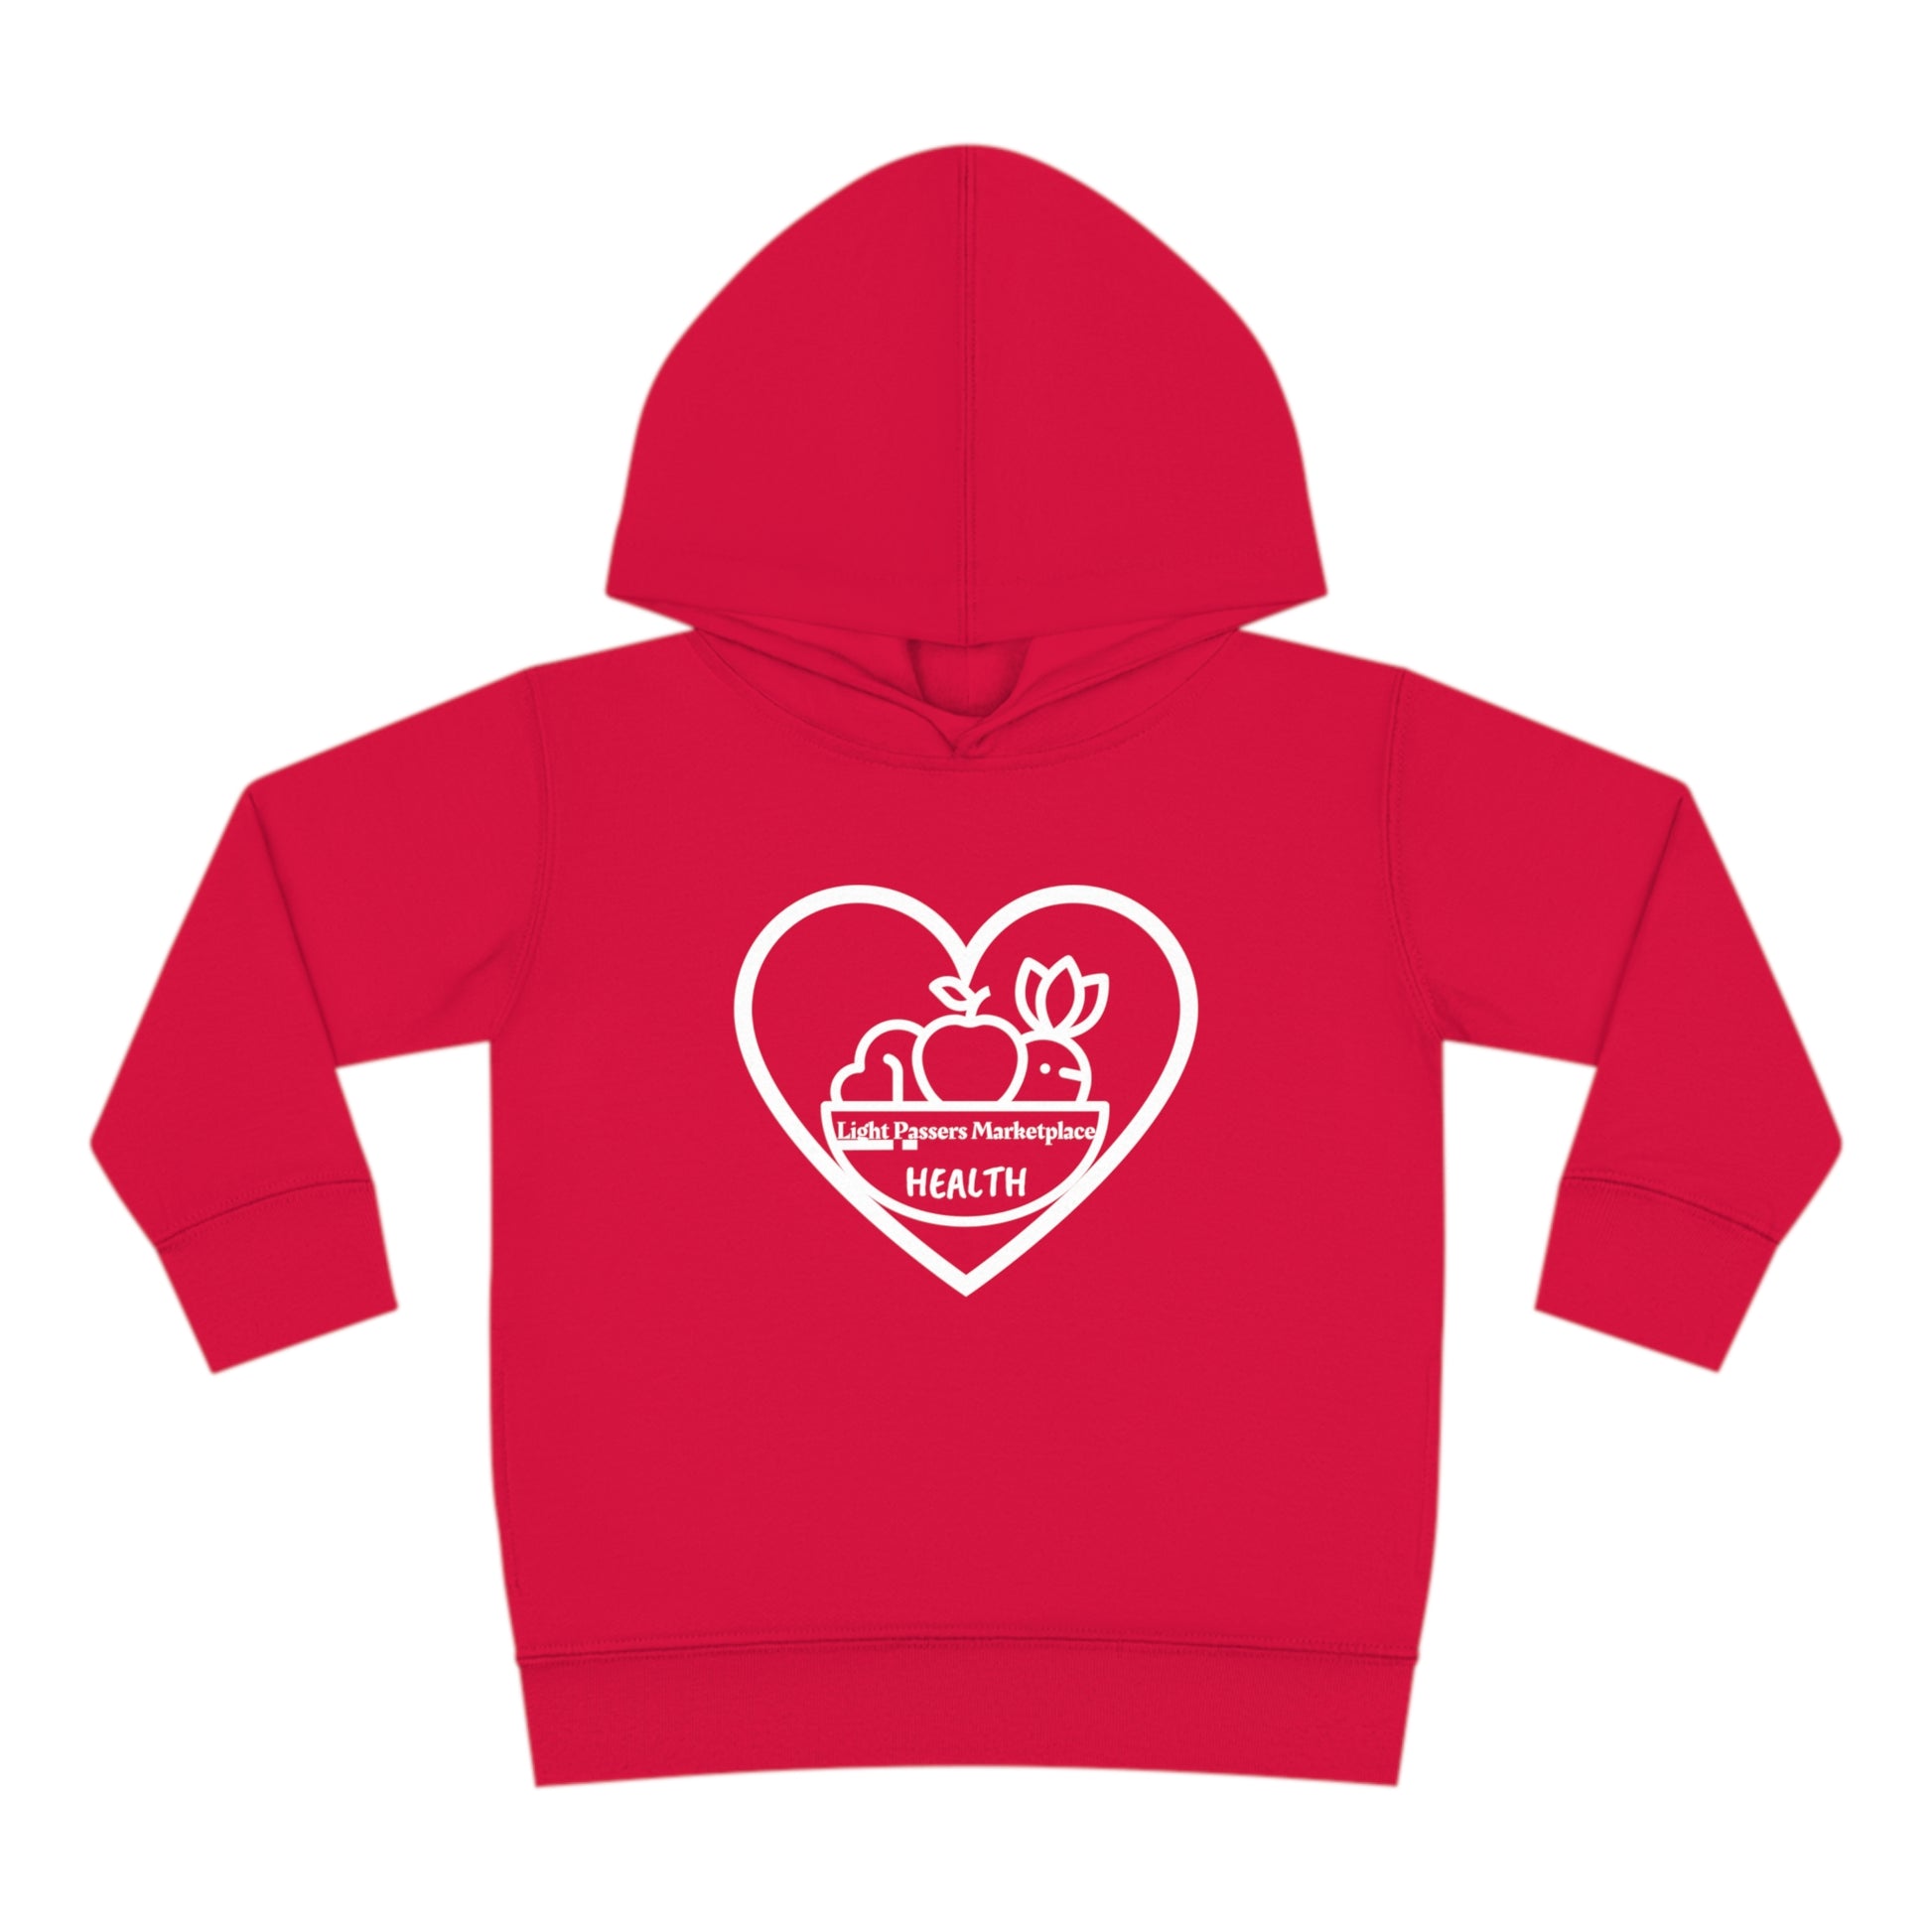 A personalized toddler hoodie featuring a heart and apple logo, with a jersey-lined hood and side seam pockets for durability and coziness. Made of 60% cotton, 40% polyester blend.